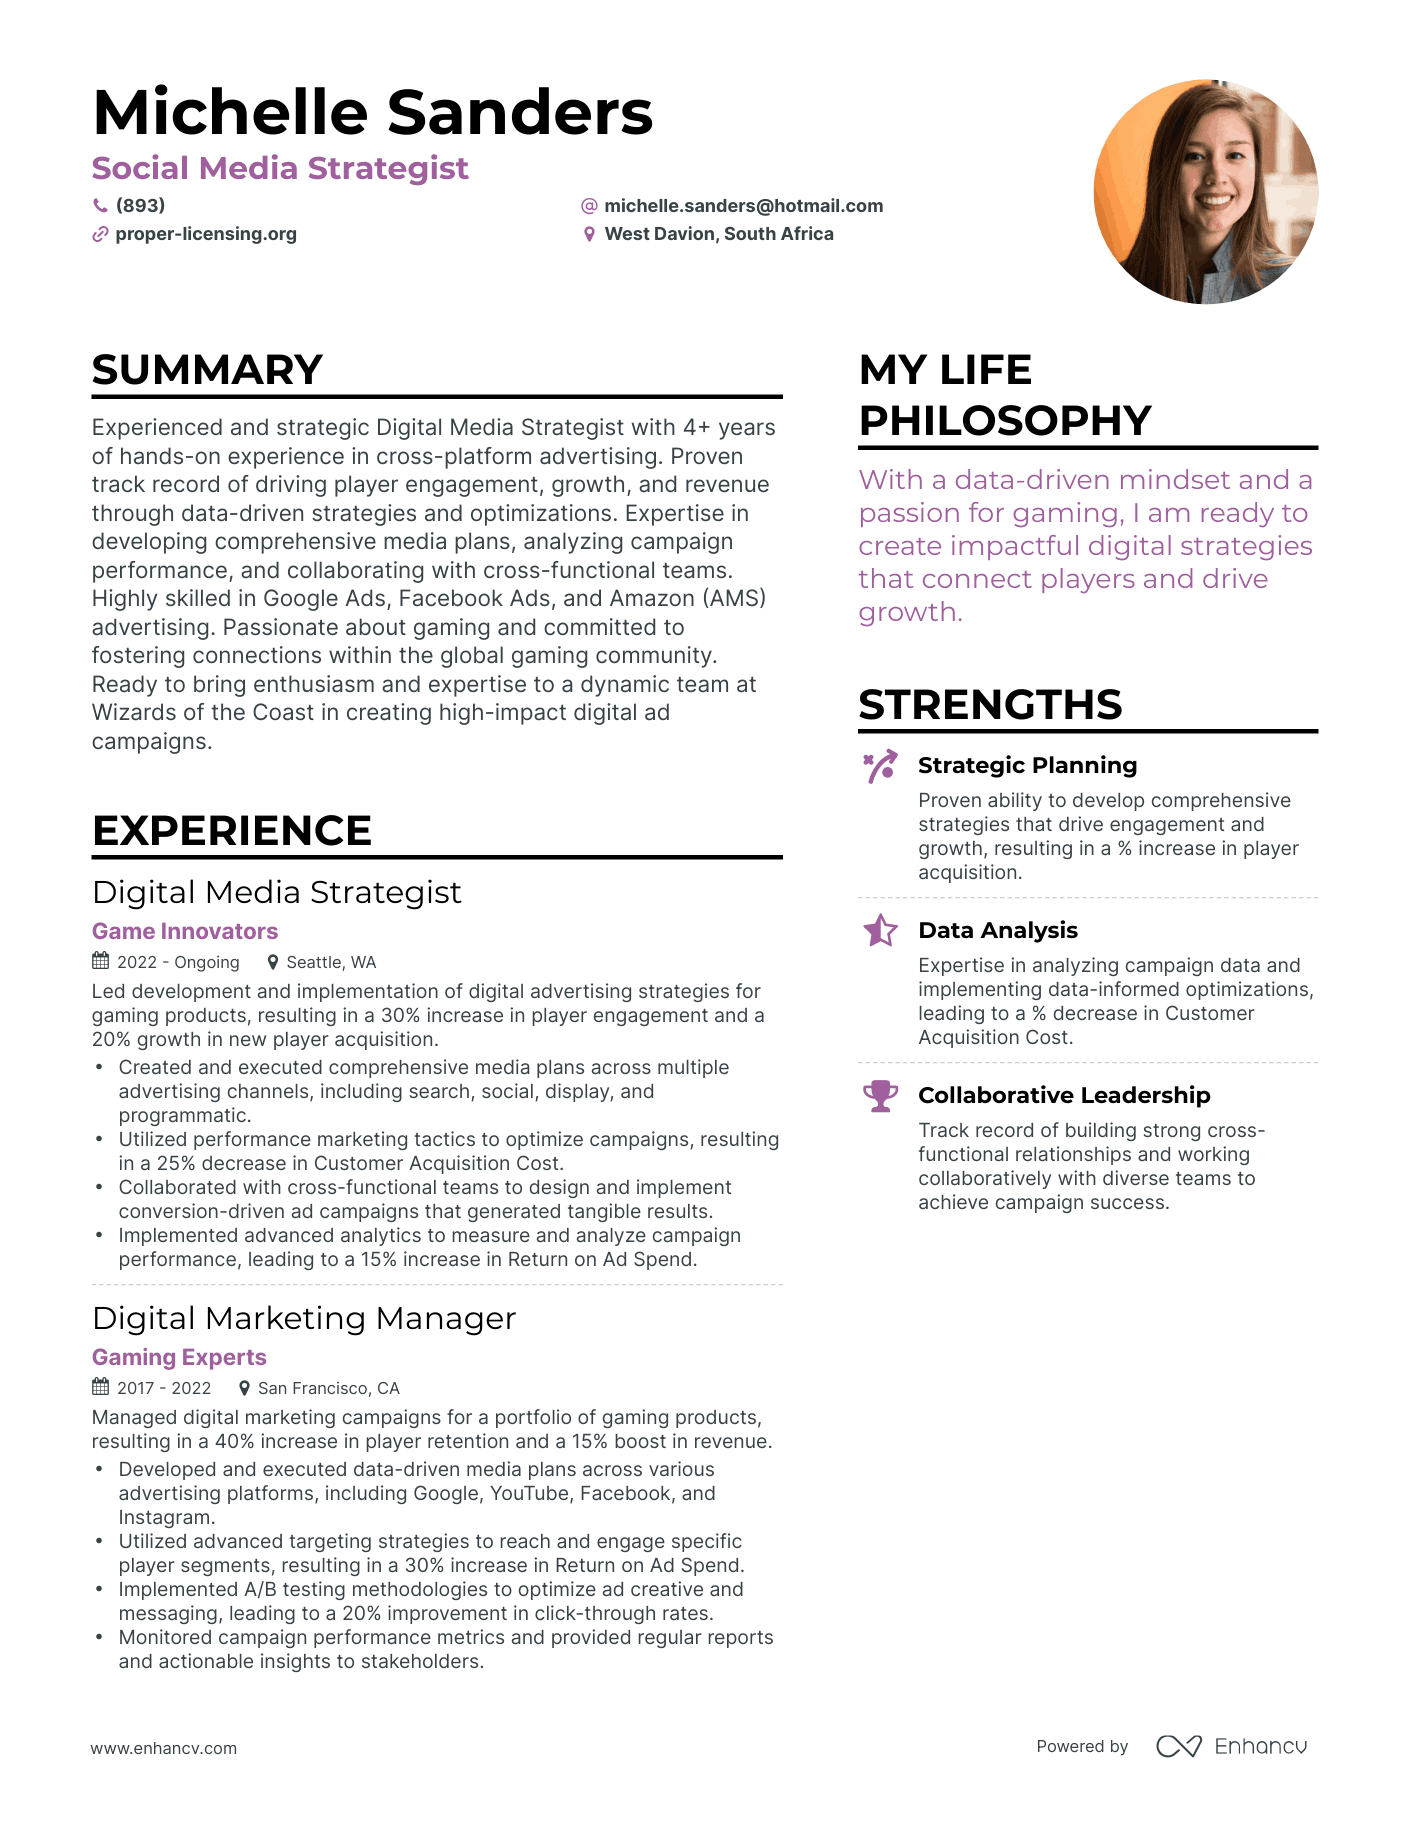 3 Social Media Strategist Resume Examples & How-To Guide for 2023